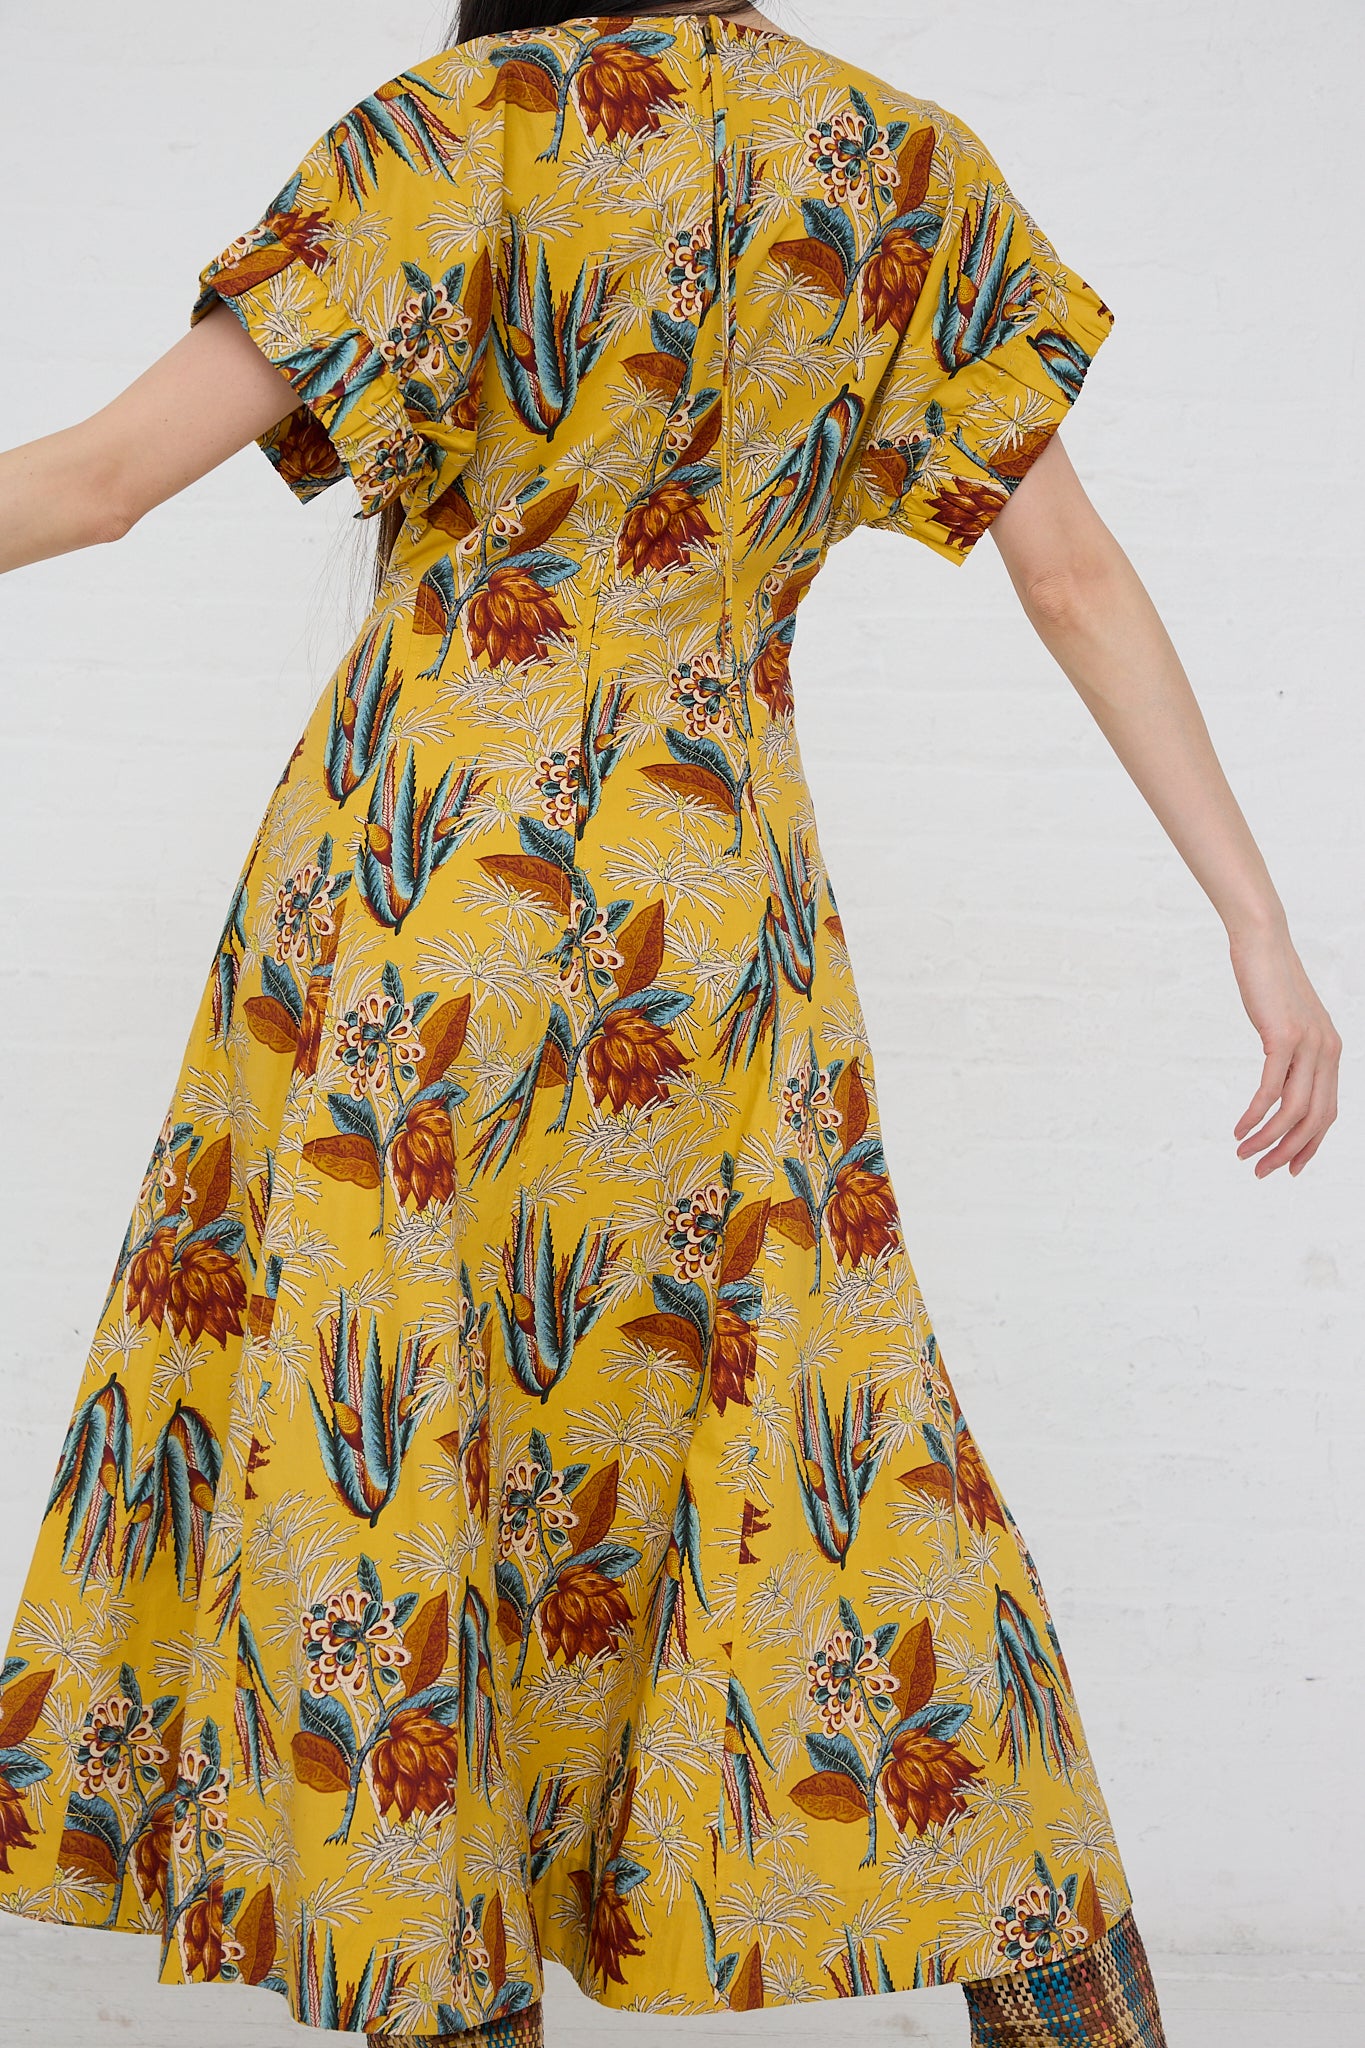 A woman wearing a Devon Dress in Marigold from Ulla Johnson, featuring a tapestry print.